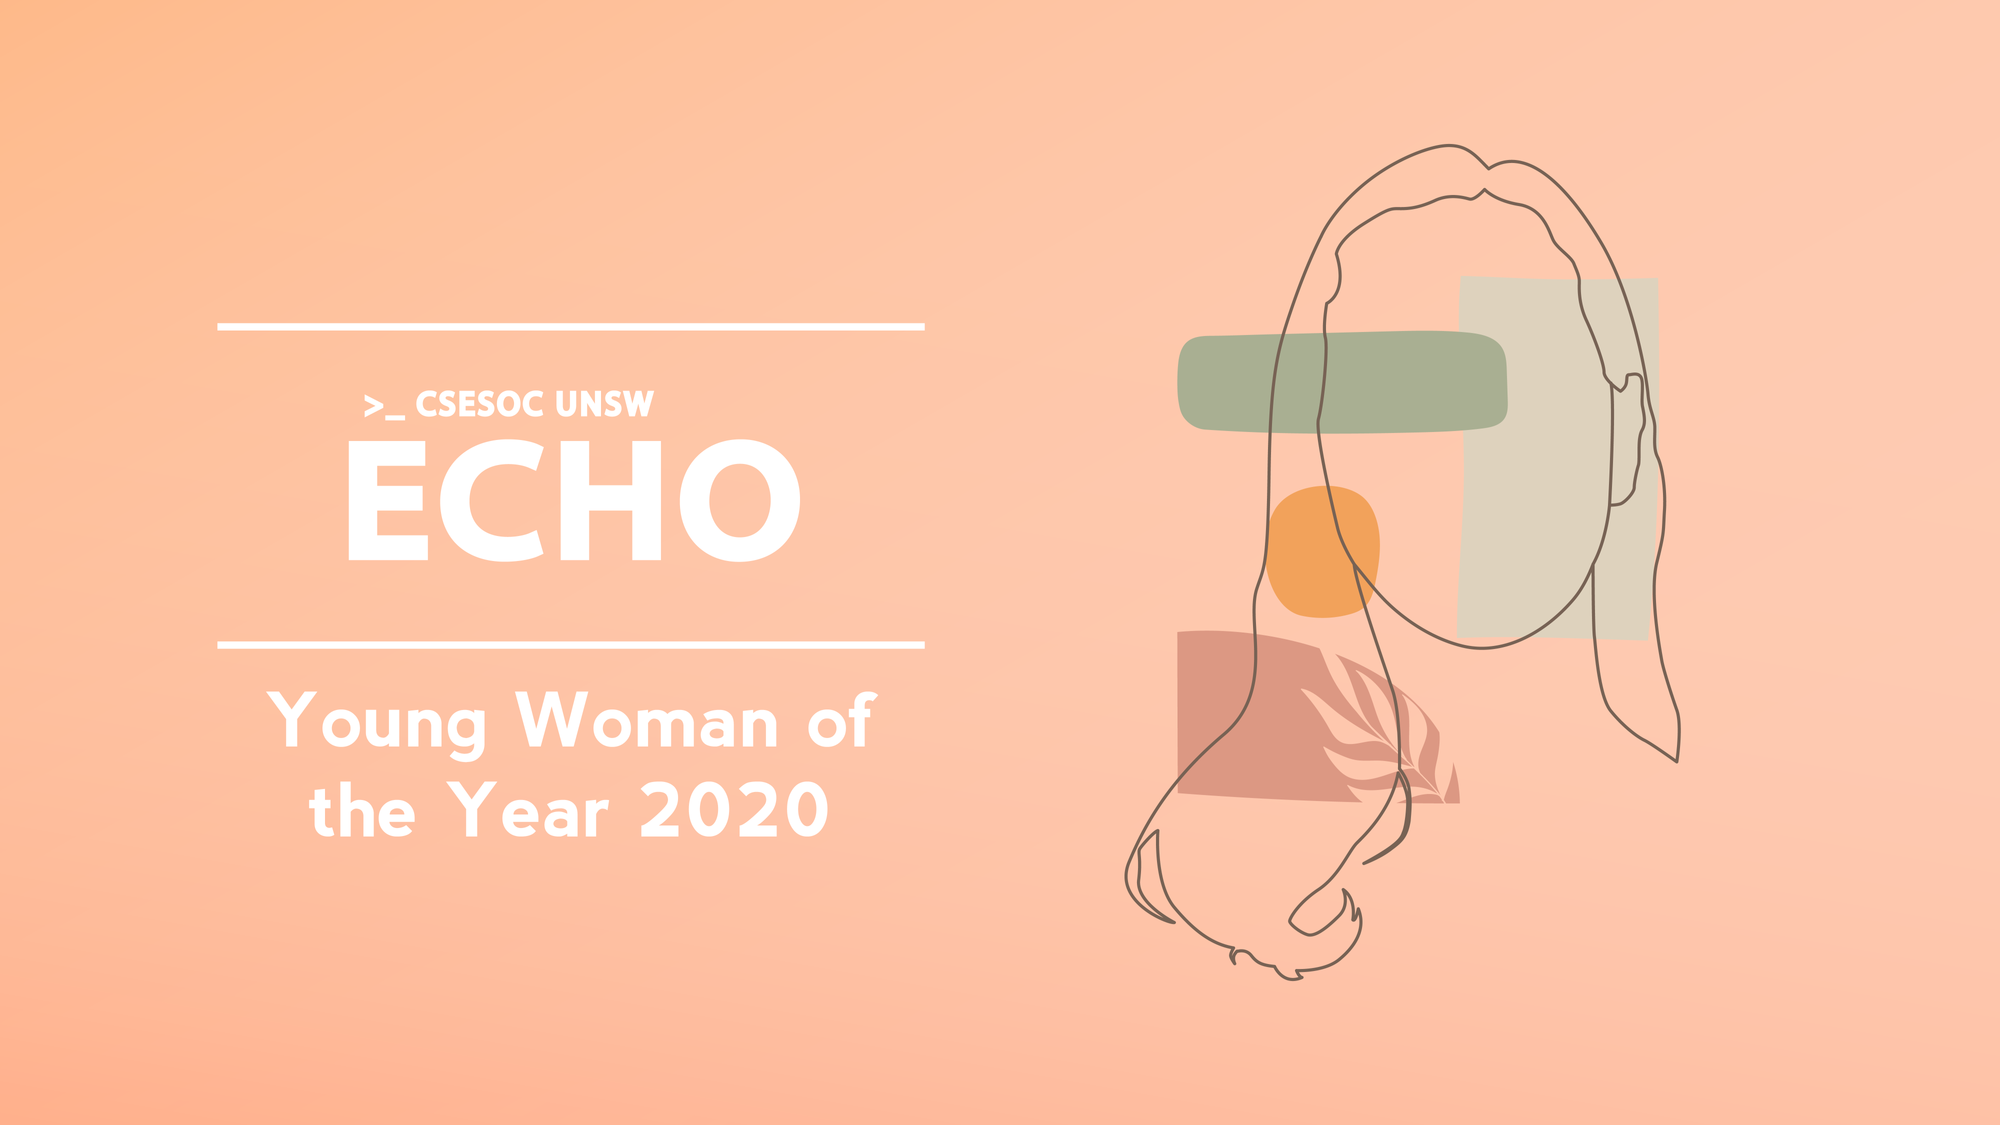 [ECHO] Getting to Know the Young Woman of the Year 2020